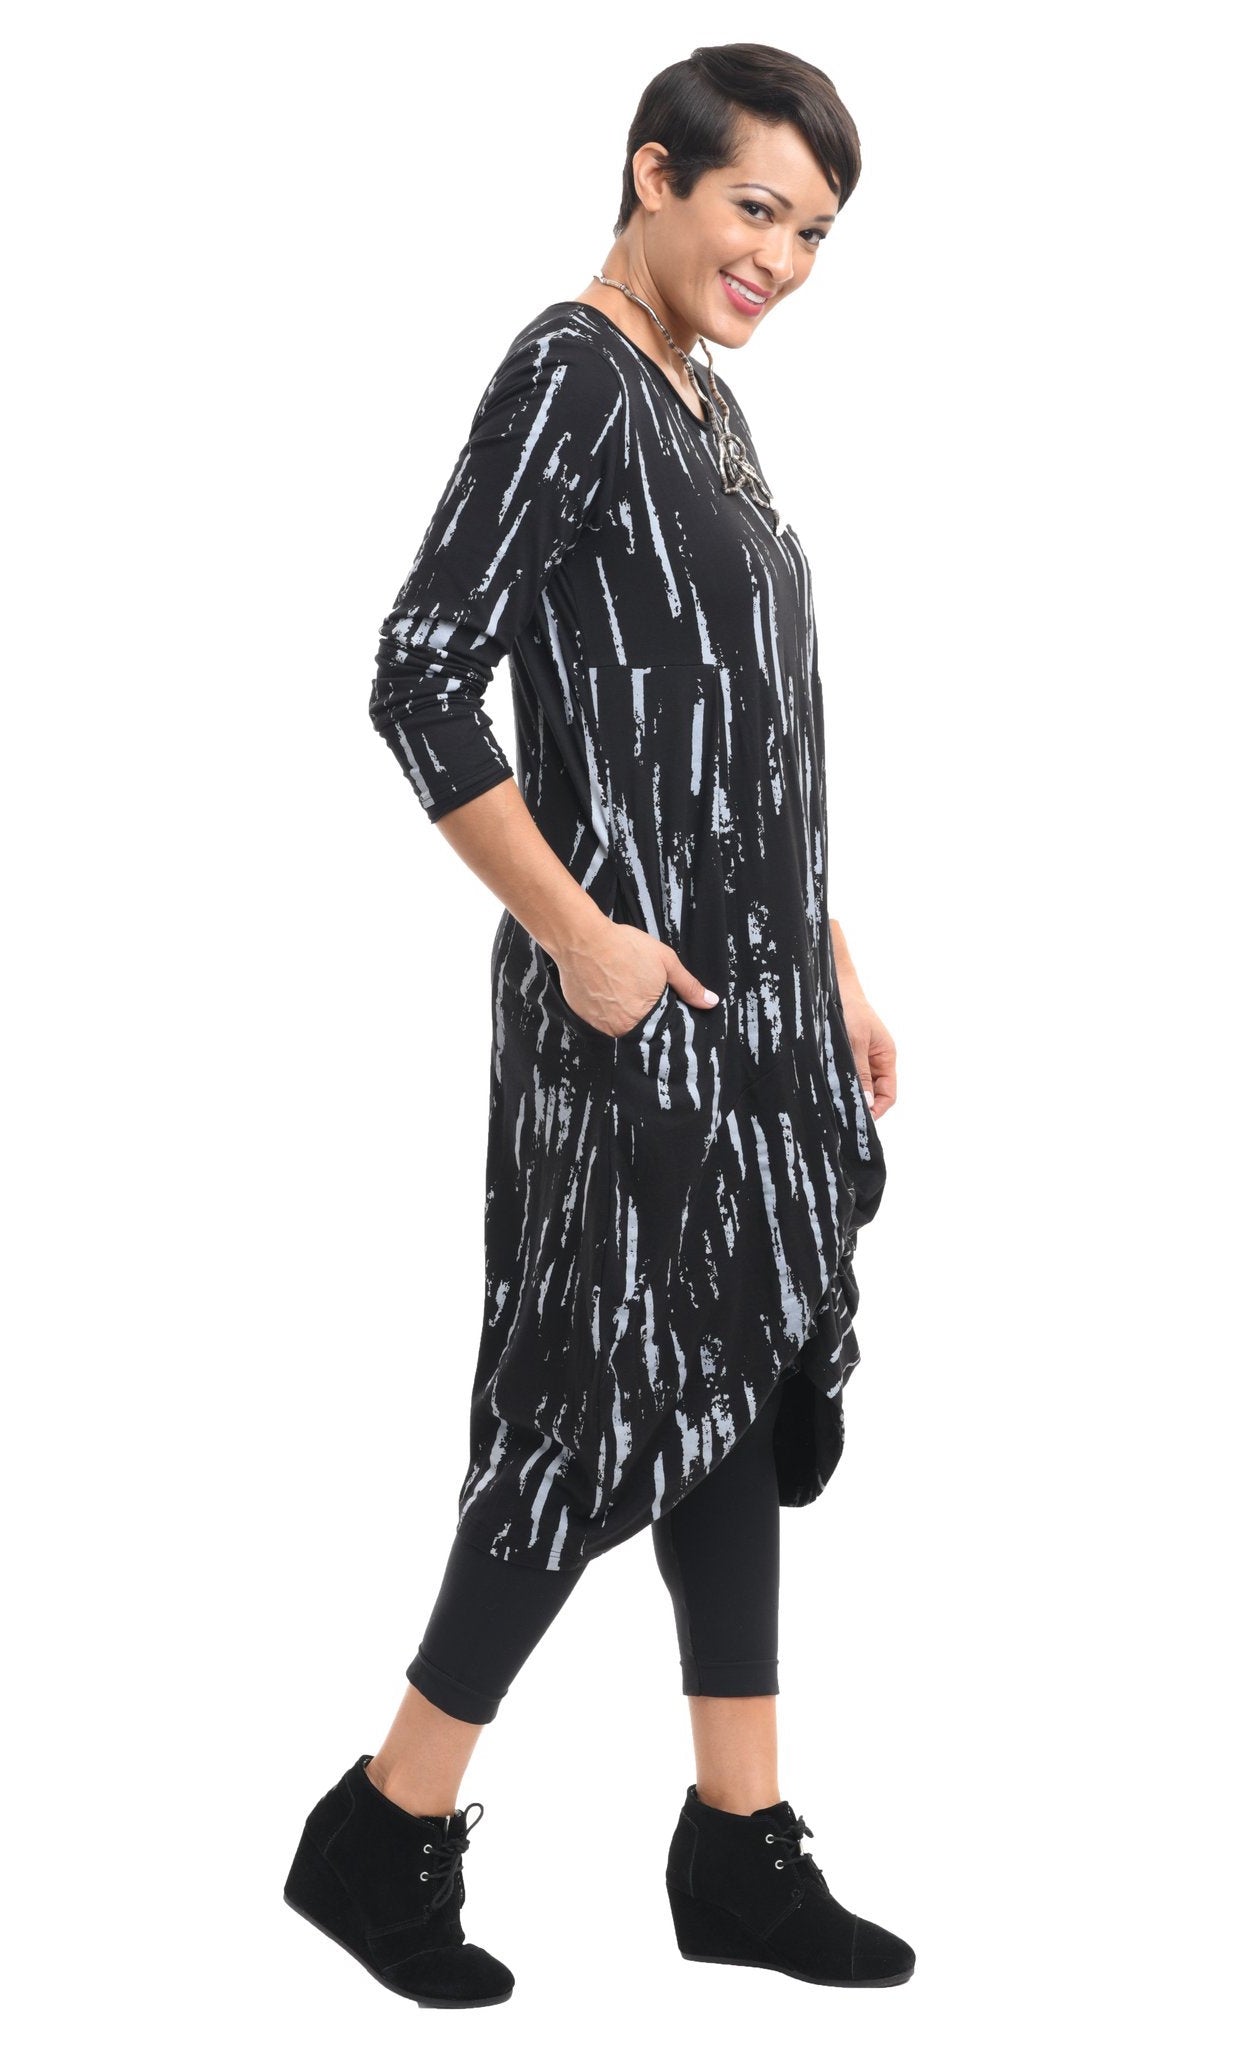 Right side full body view of a woman wearing the tulip karma dress in black with a grey airbrush print. The dress has long sleeves, a gathered knot in the front, and pockets.